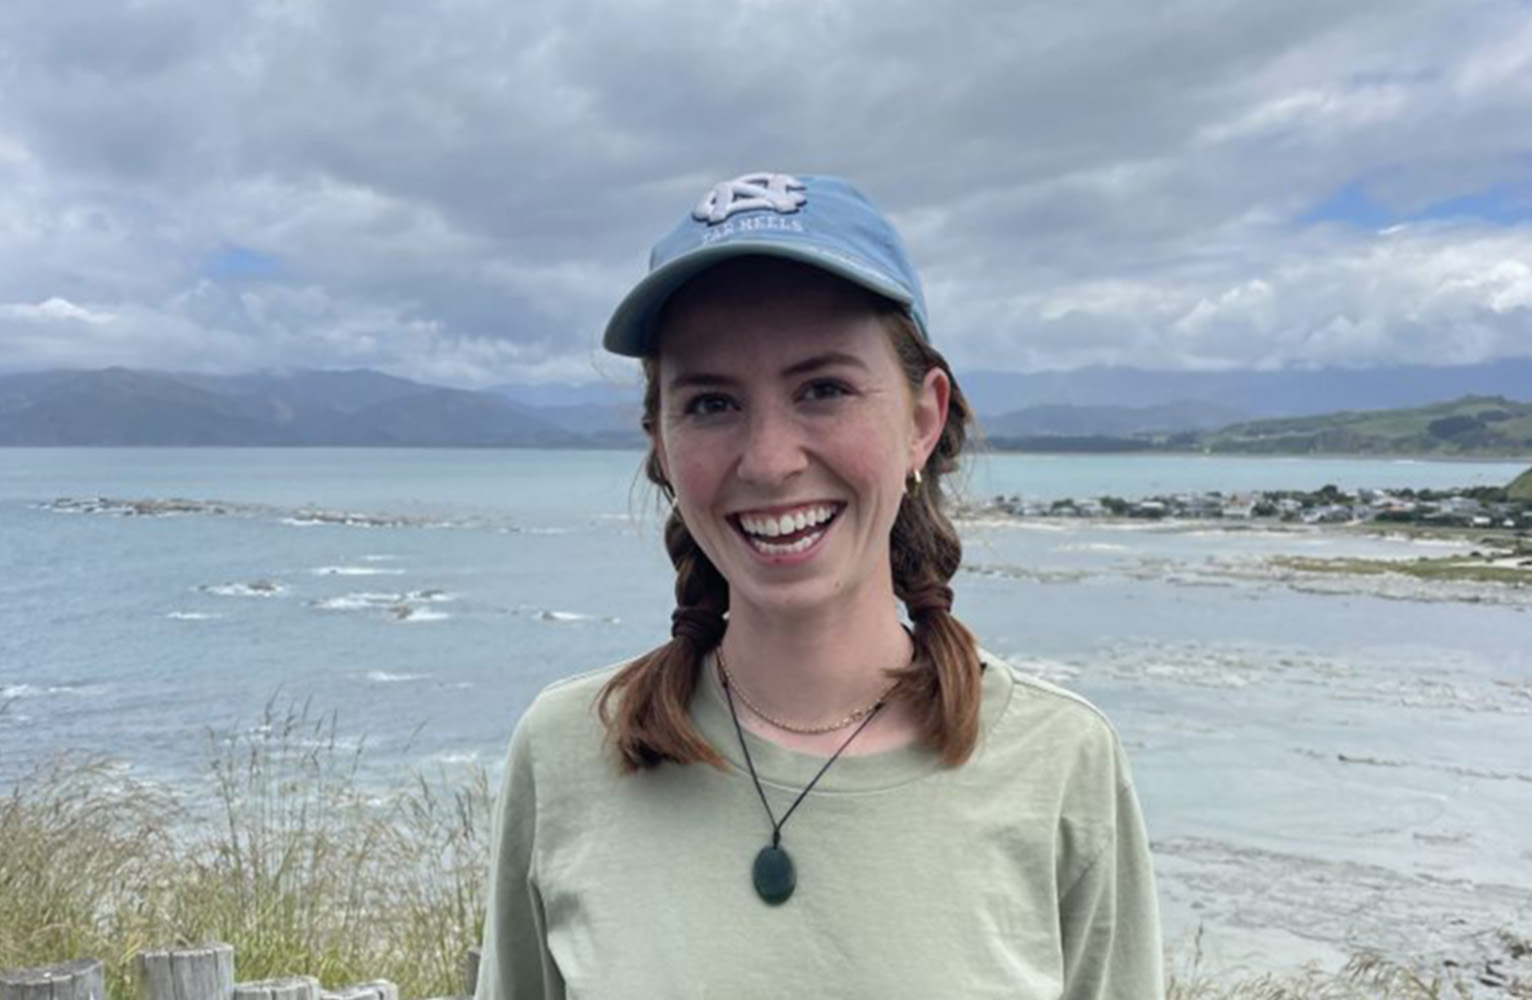 Charlotte Dorn stands on the coast wearing a UNC hat